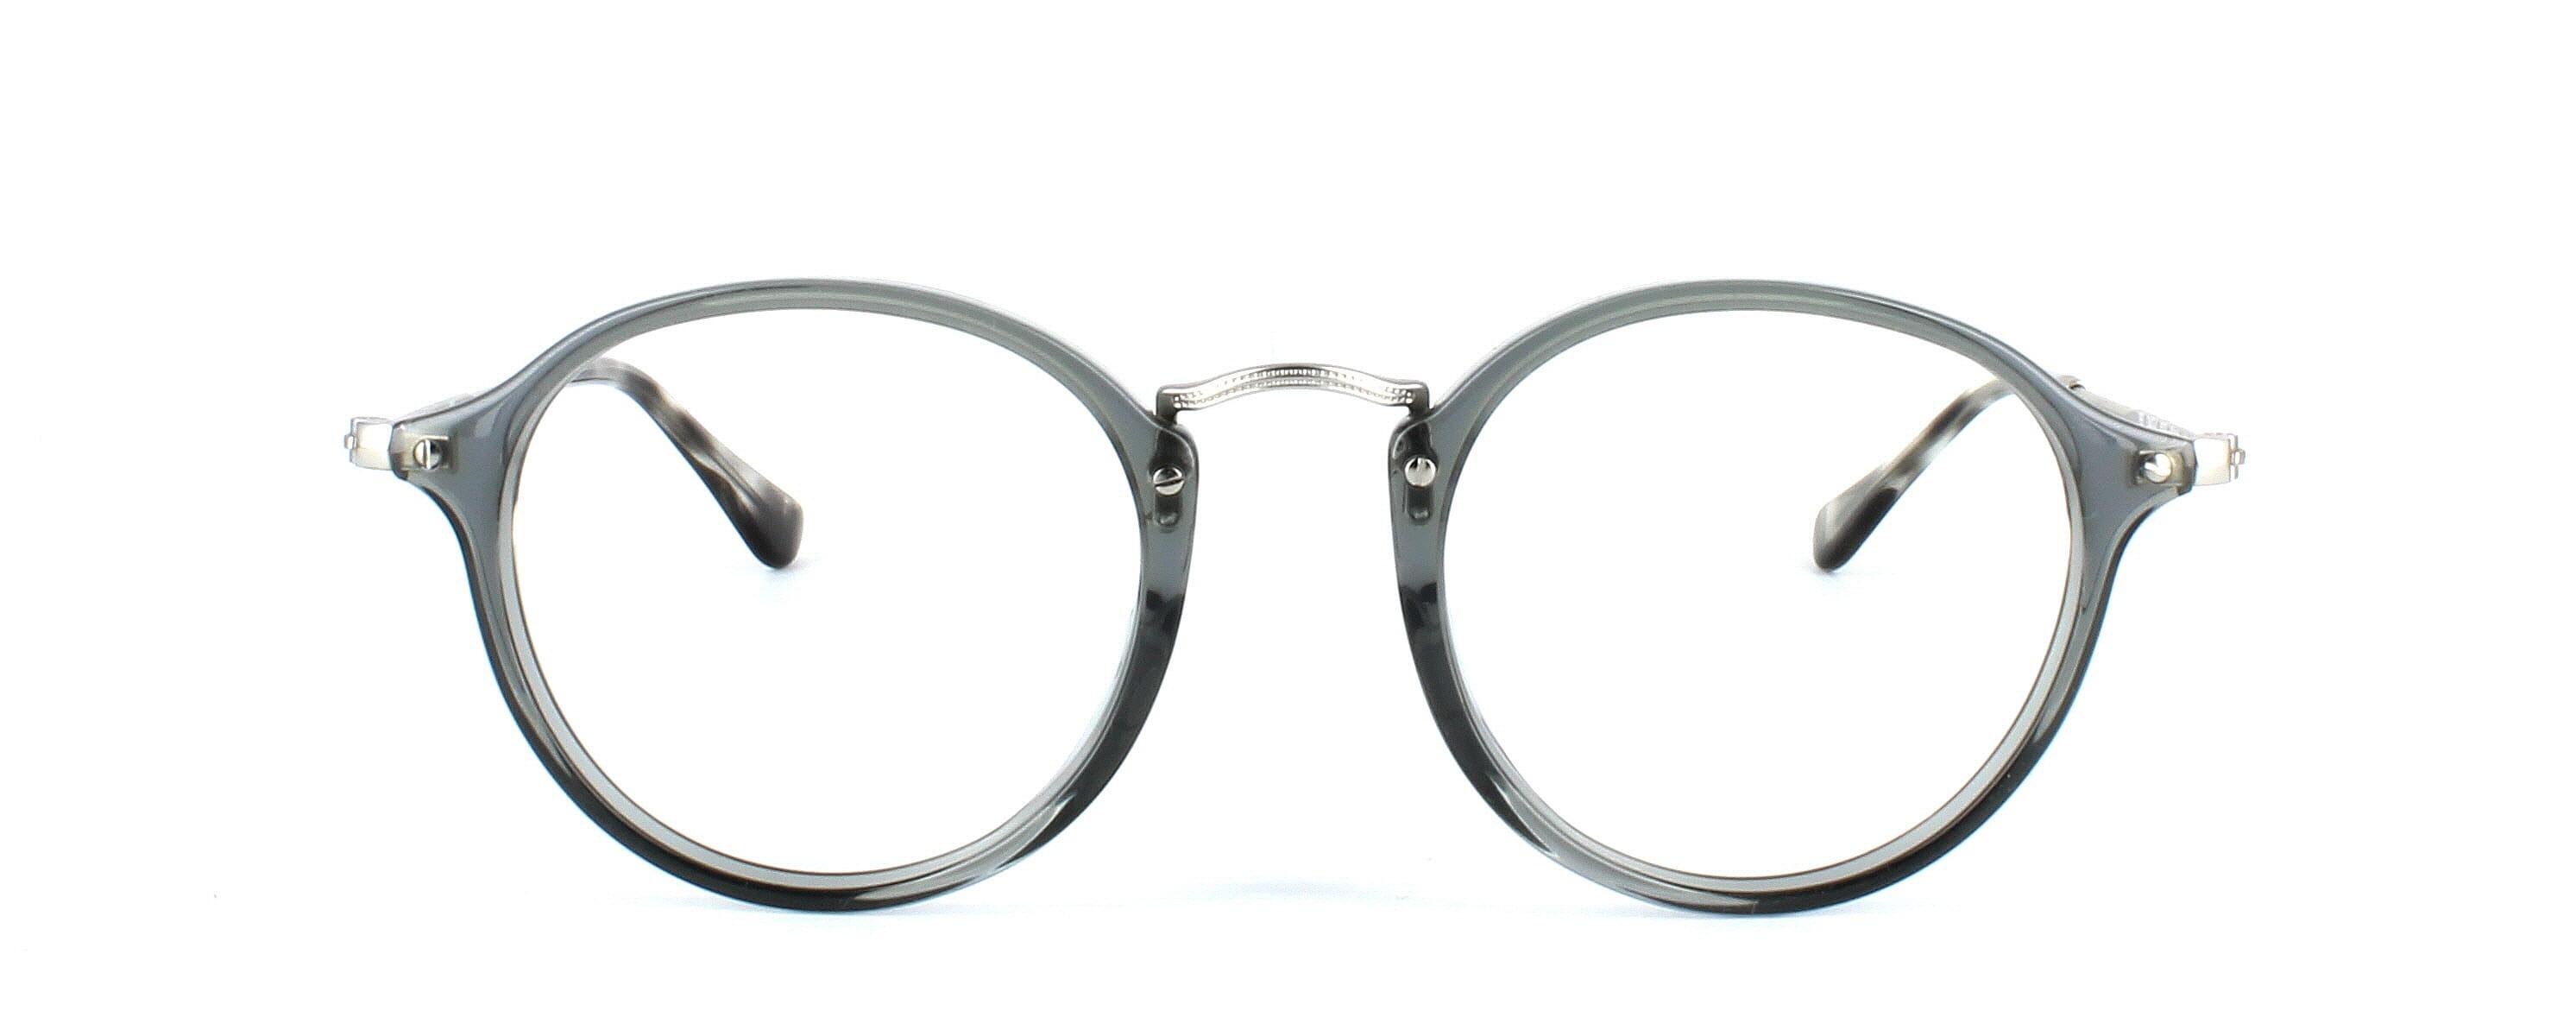 Ray Ban 2447 - Crystal Grey - Ladies round shaped glasses - image view 2